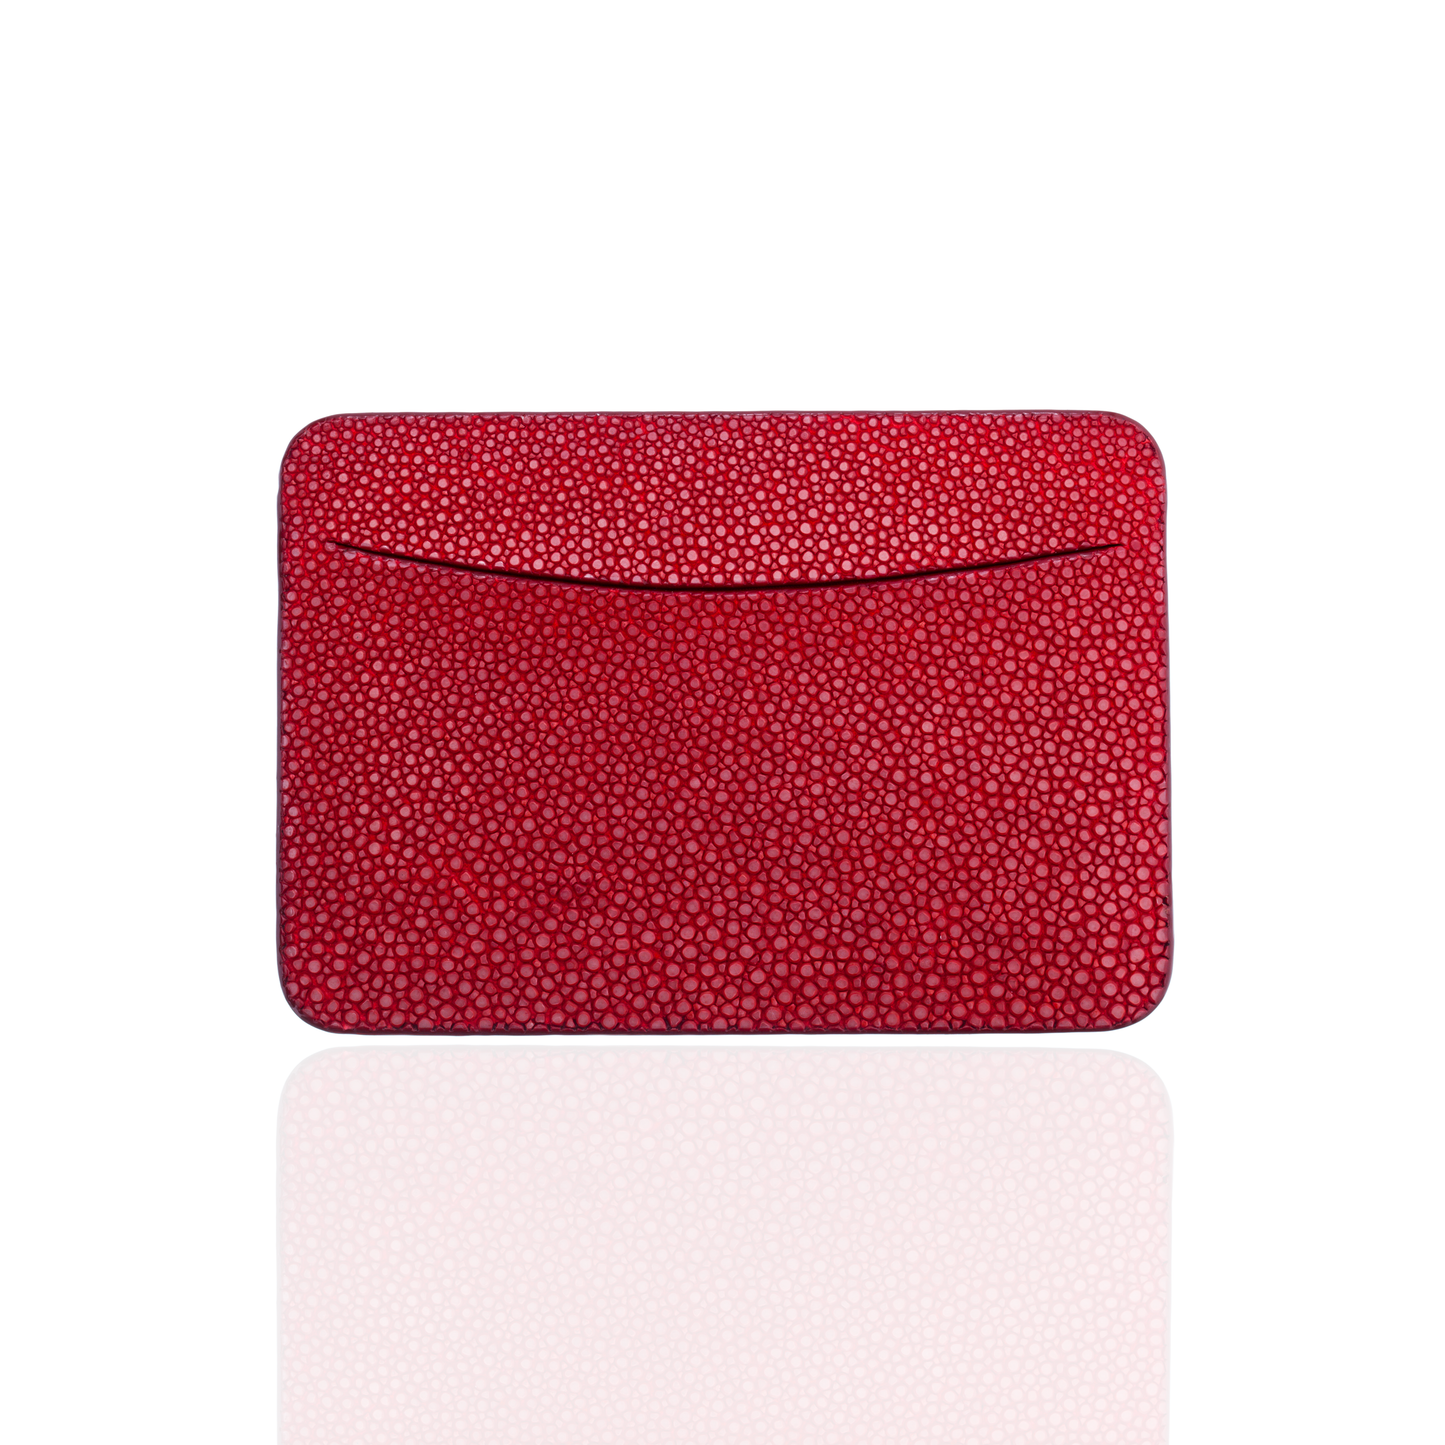 Load image into Gallery viewer, Credit Card Pouch in Red Stingray Leather
